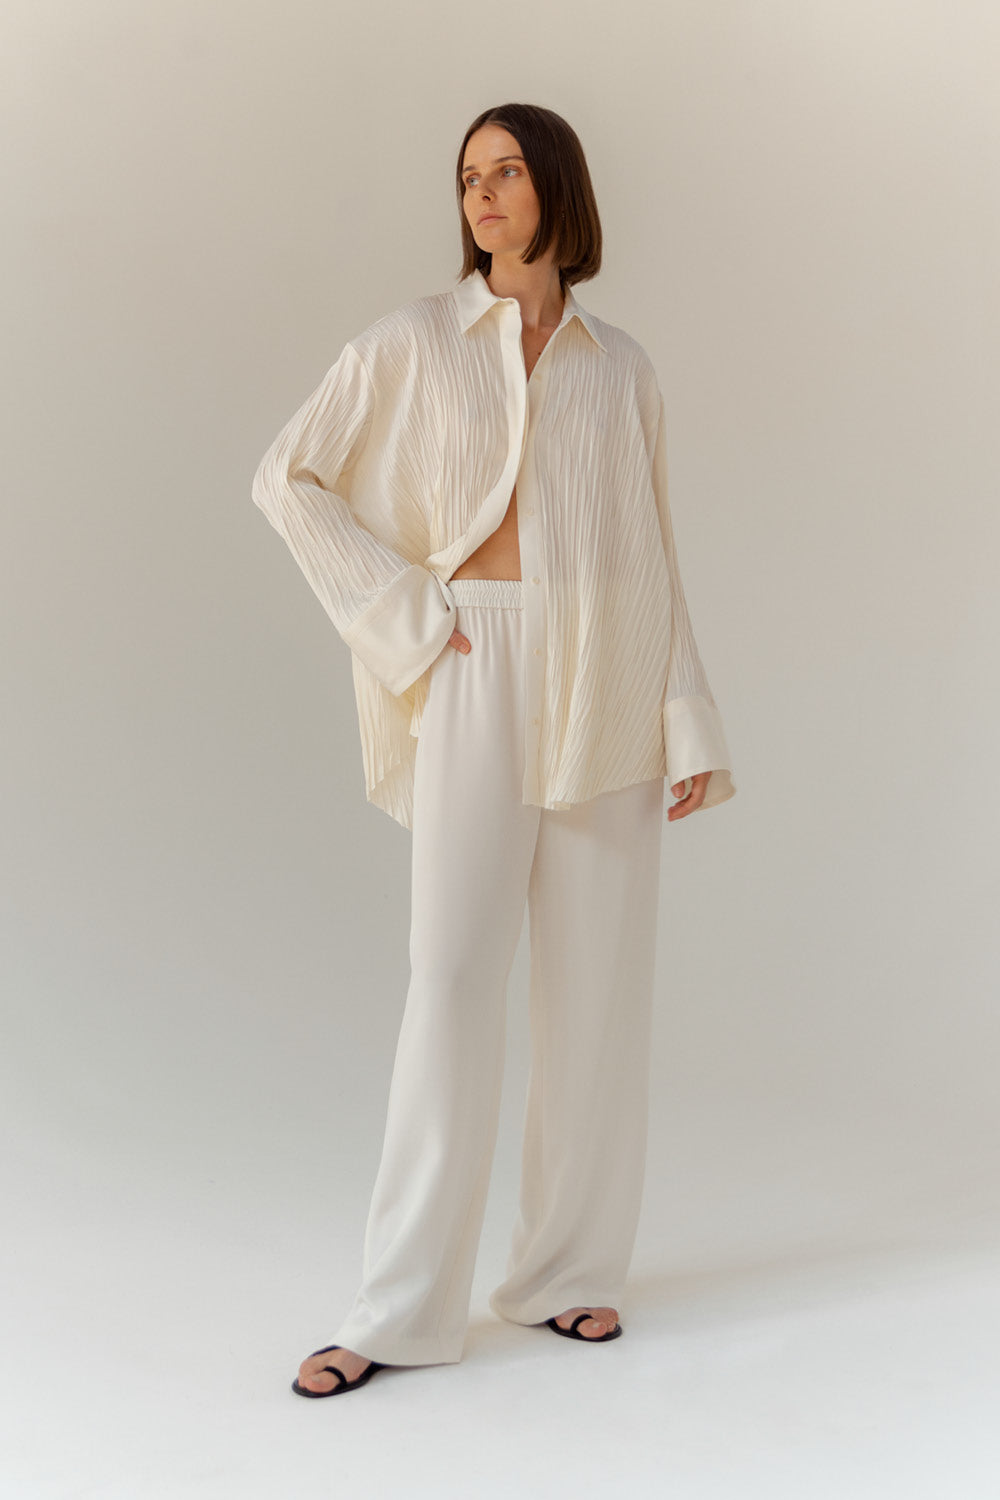 Genevieve Trouser in Ivory